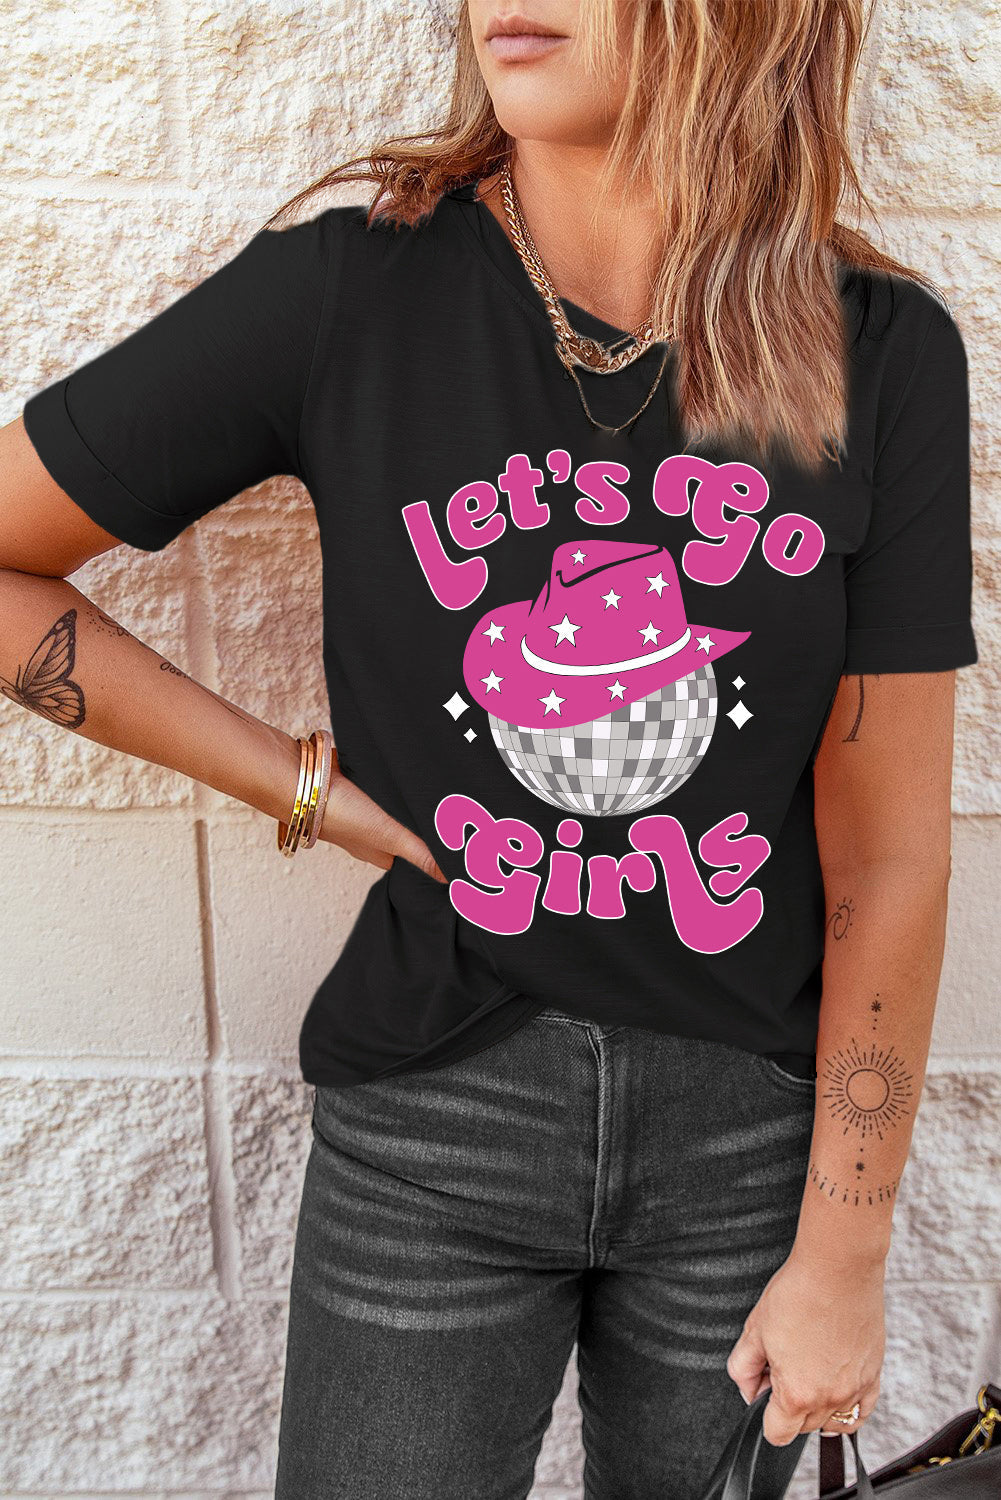 LET'S GO GIRLS Graphic Tee Shirt The Stout Steer